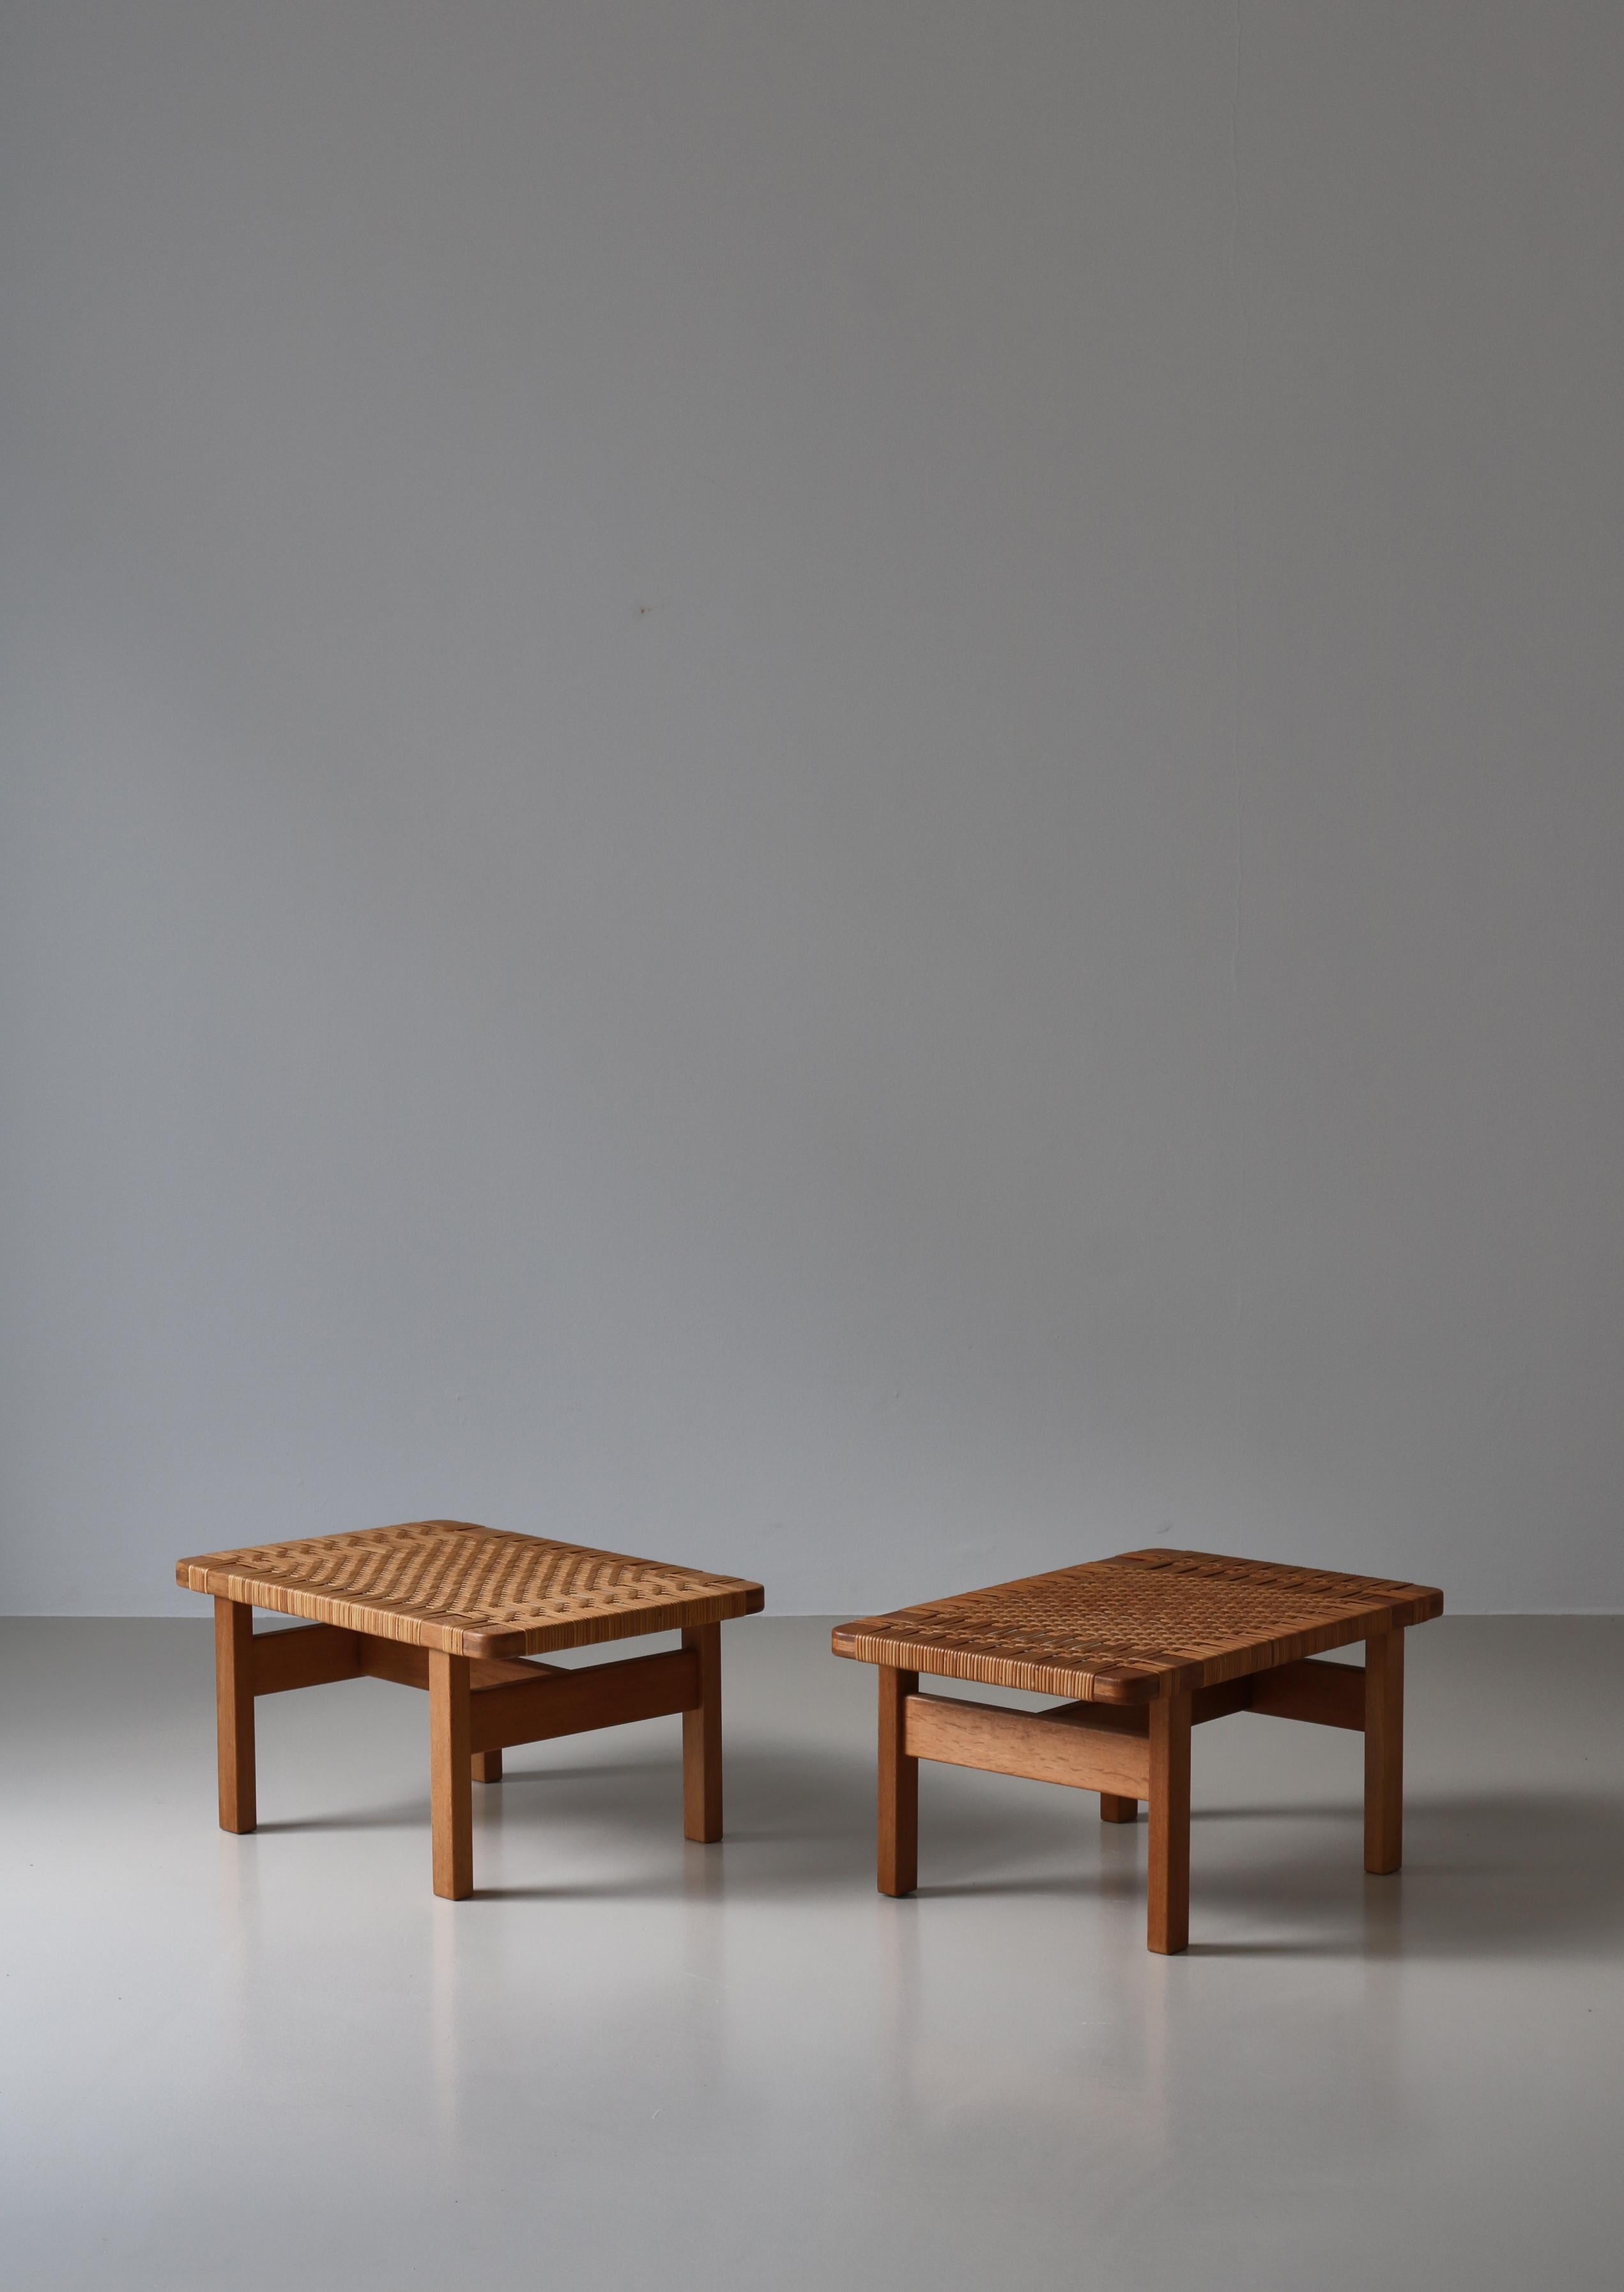 Danish Borge Mogensen Set of Side Tables/Benches in Oak and Rattan Cane, 1960s, Denmark For Sale